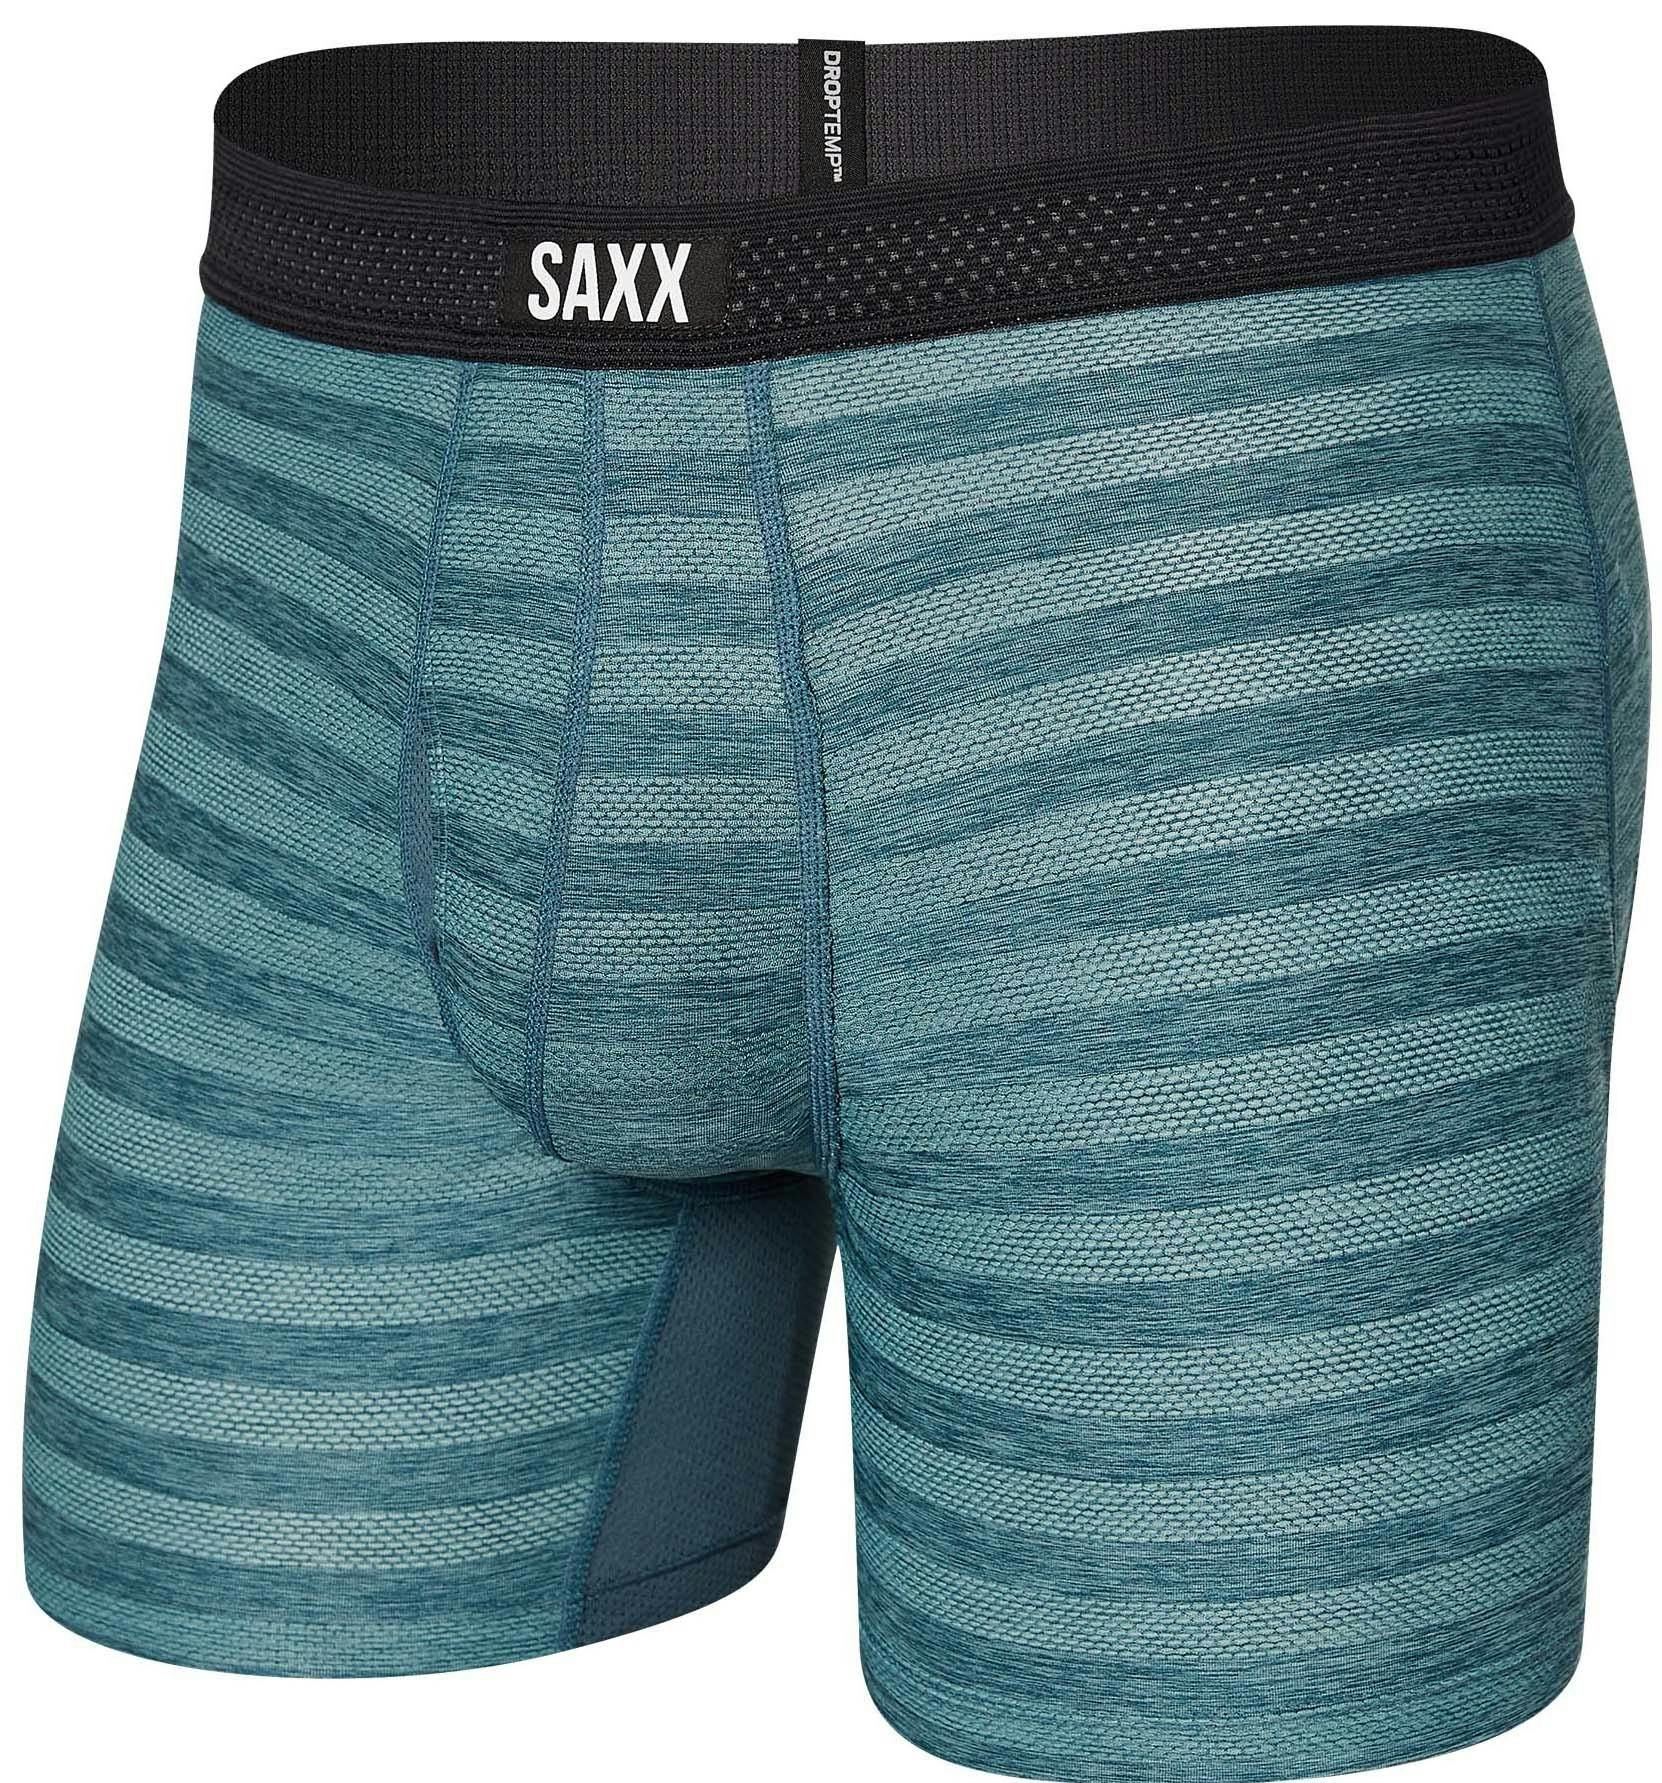 Product image for Hot Shot Boxer Brief Fly - Men's